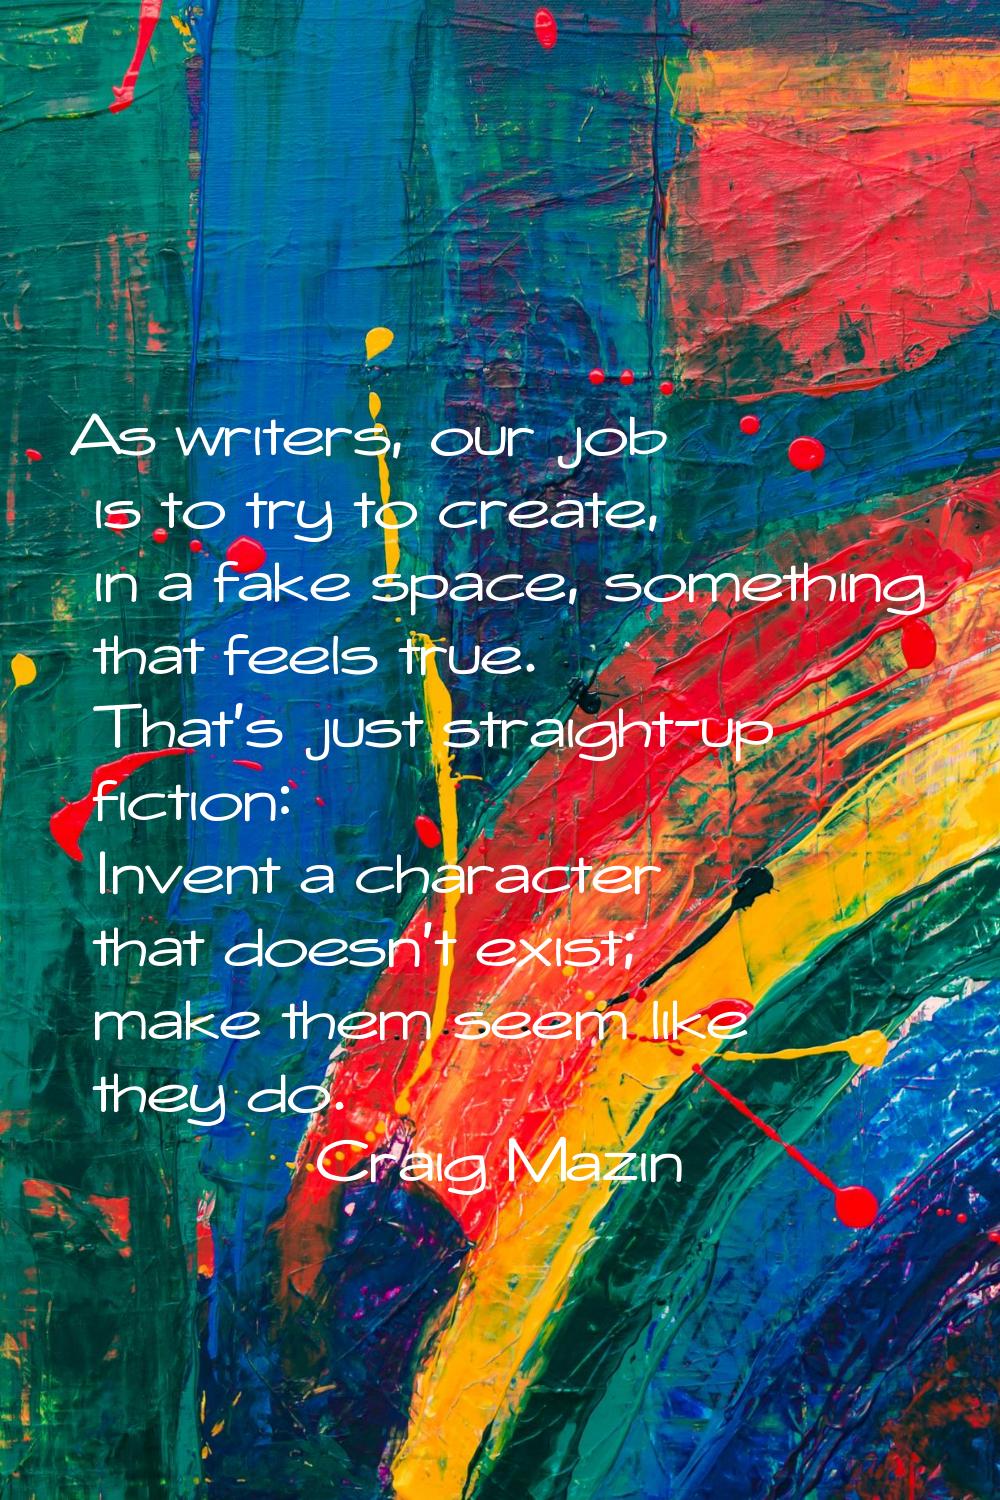 As writers, our job is to try to create, in a fake space, something that feels true. That's just st